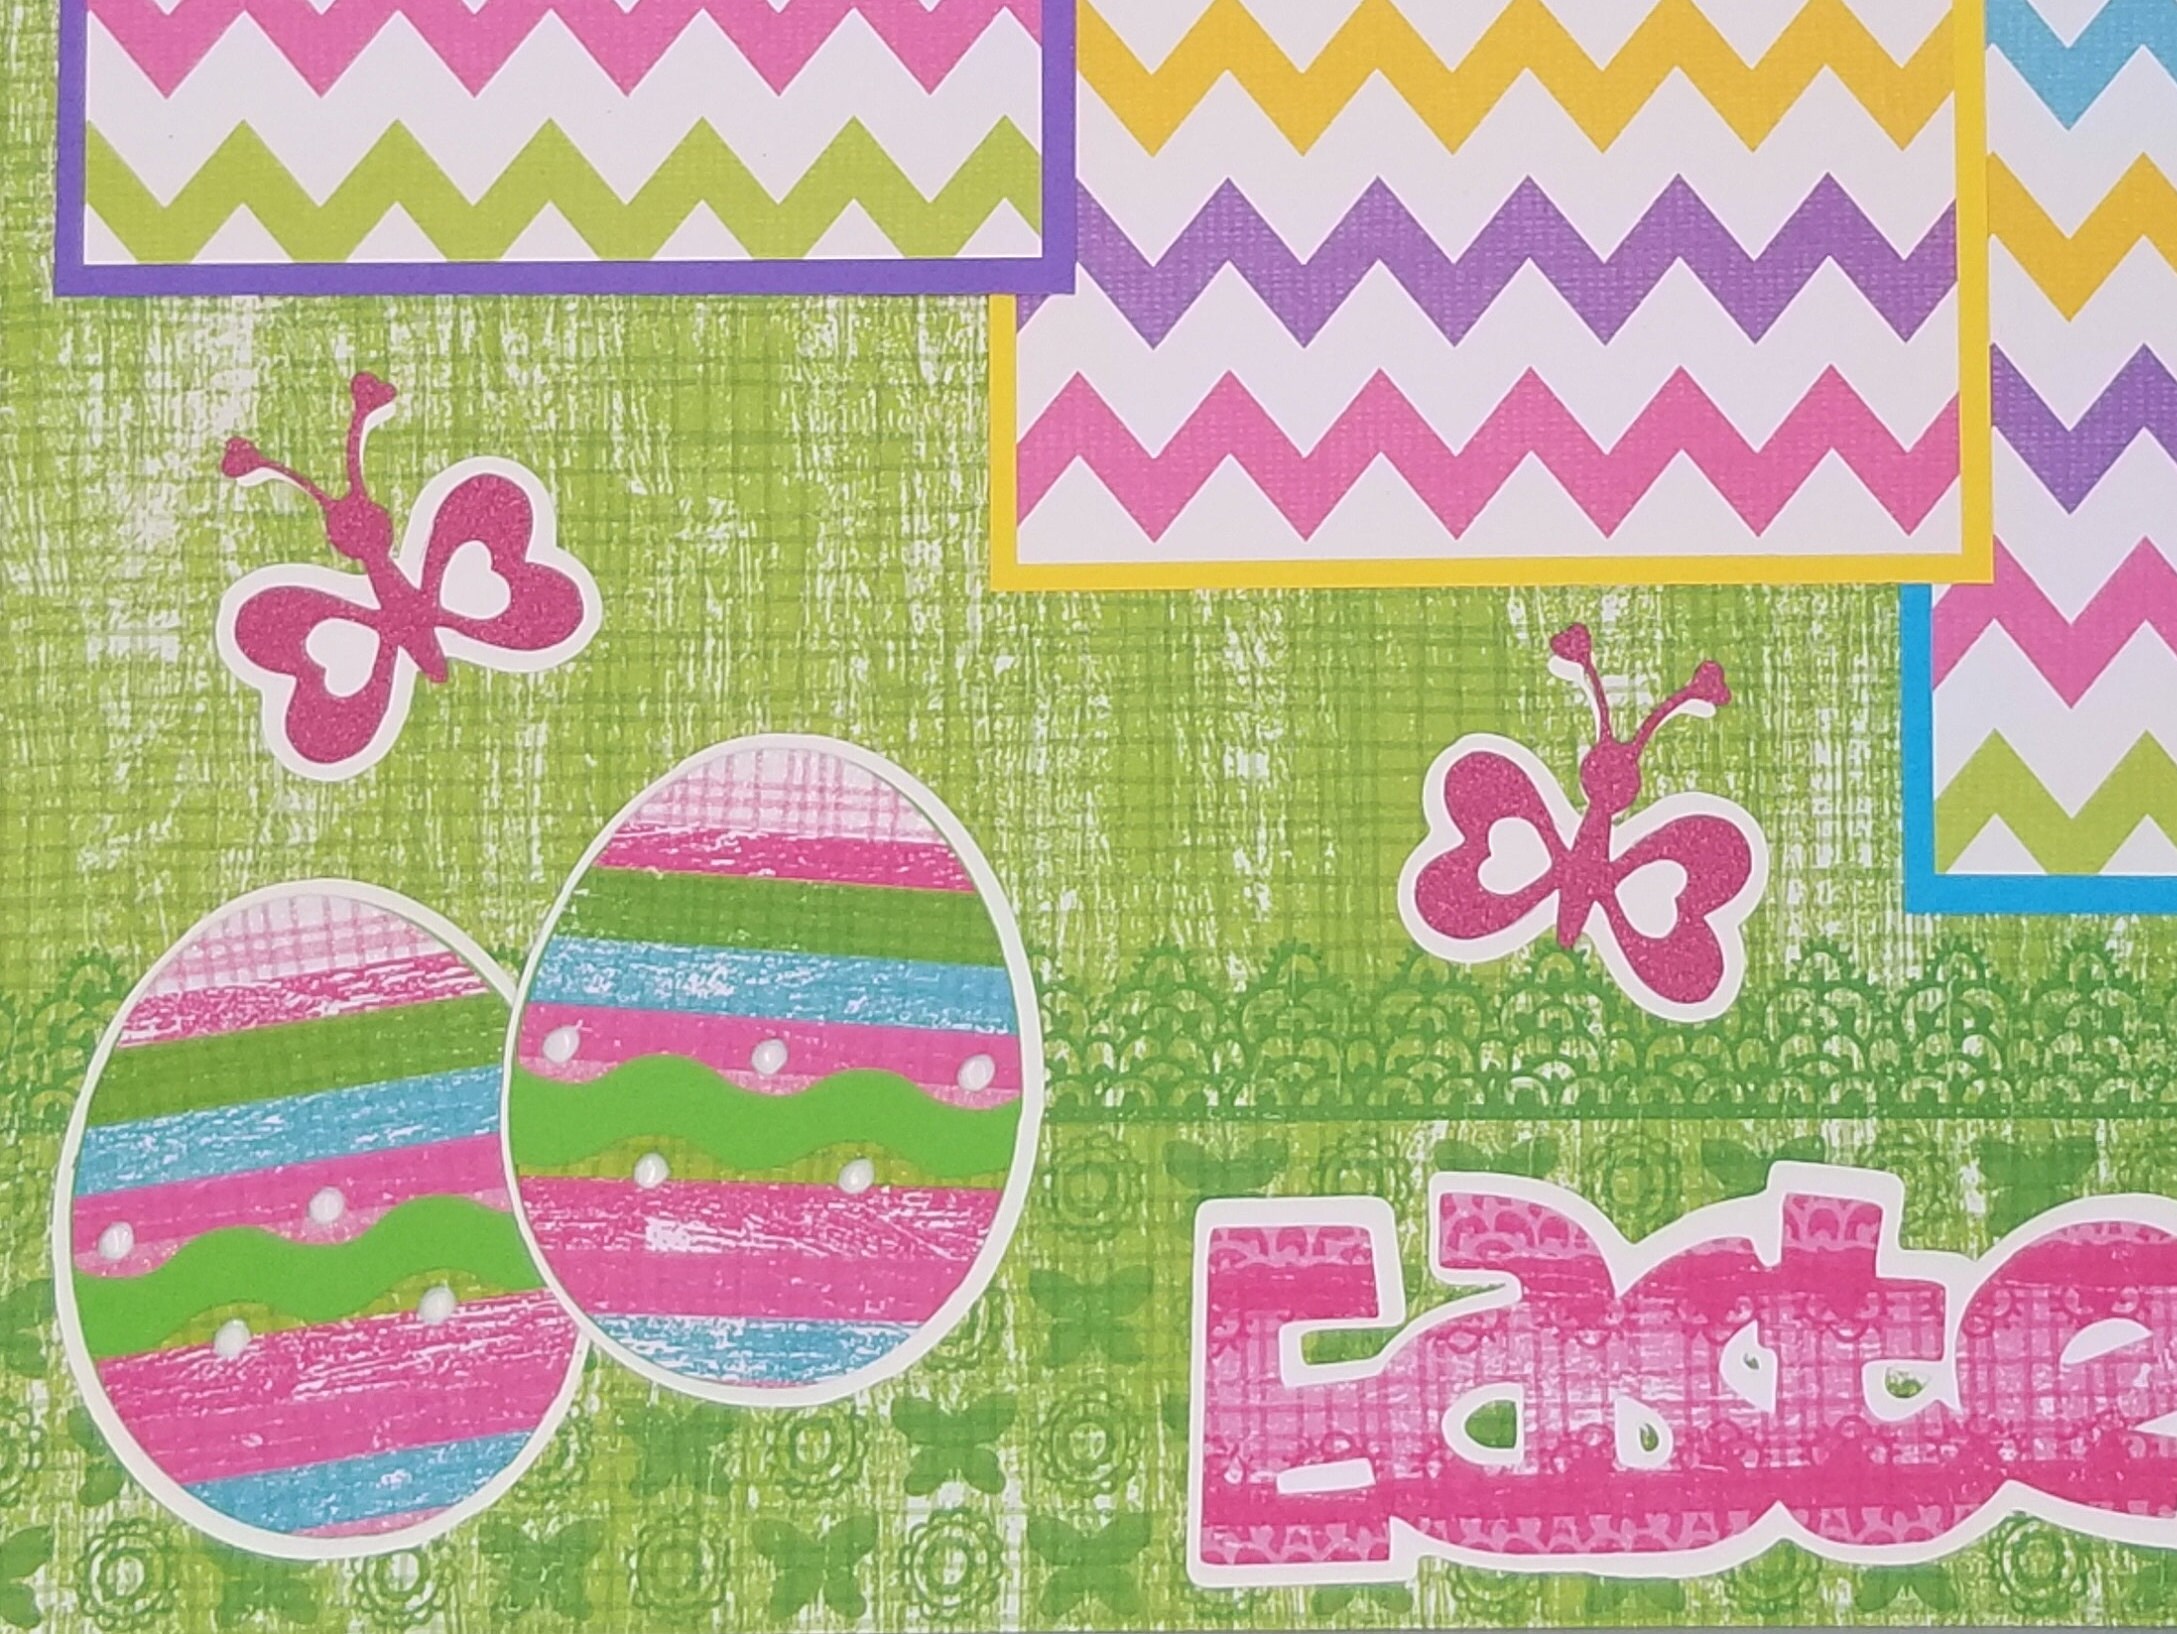 Papercraft Happy Hoppy Easter Handmade Premade 12 X 12 Layout Scrapbook Page Easter Craft